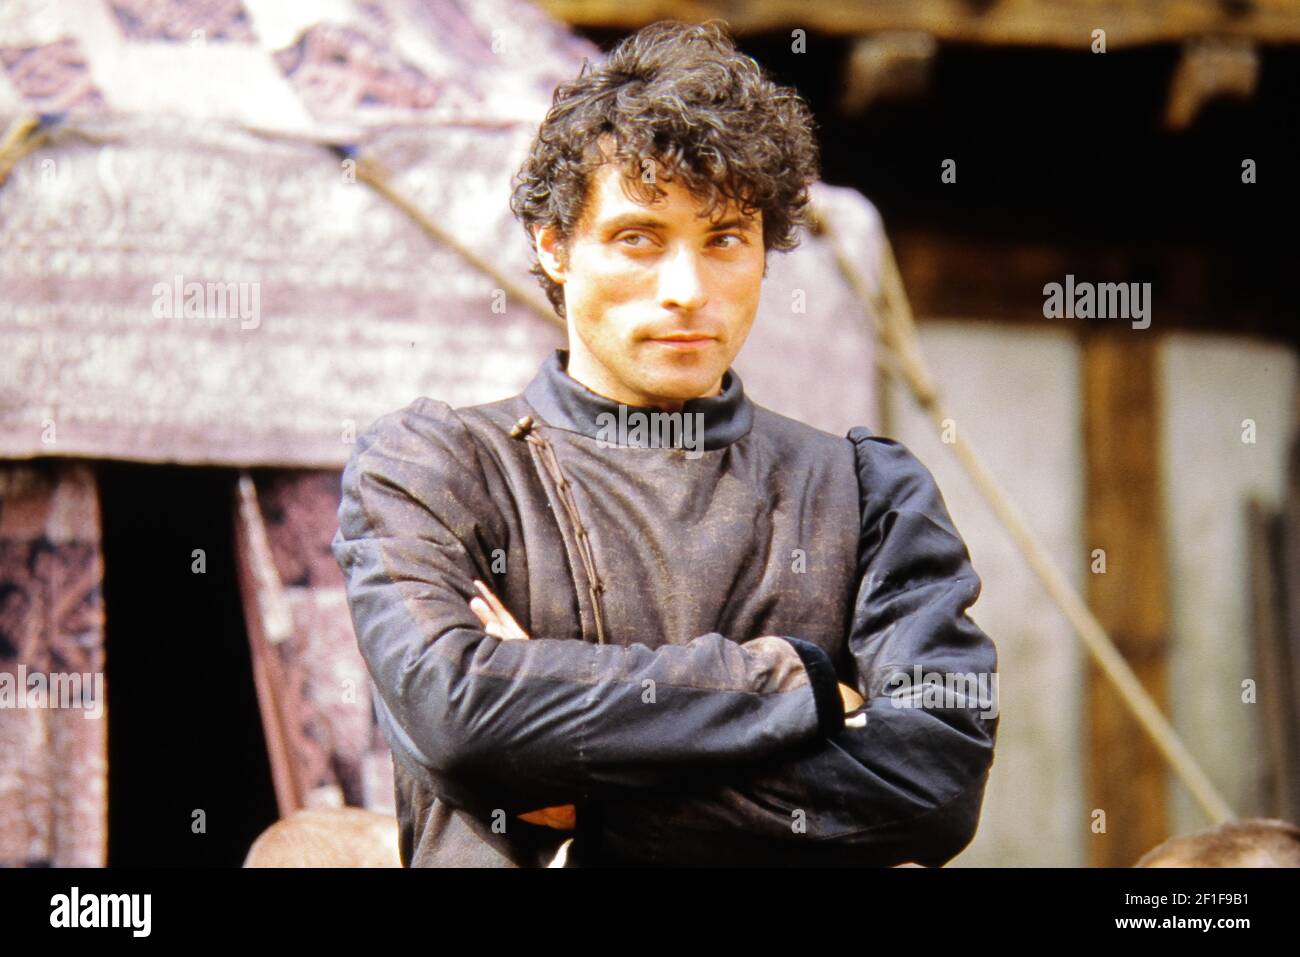 Rufus Sewell, 'A Knight's Tale' (2001) Sony Pictures. Photo Credit: Egon Endrenyi/Sony Pictures/The Hollywood Archive - File Reference # 34082-1066THA Stock Photo